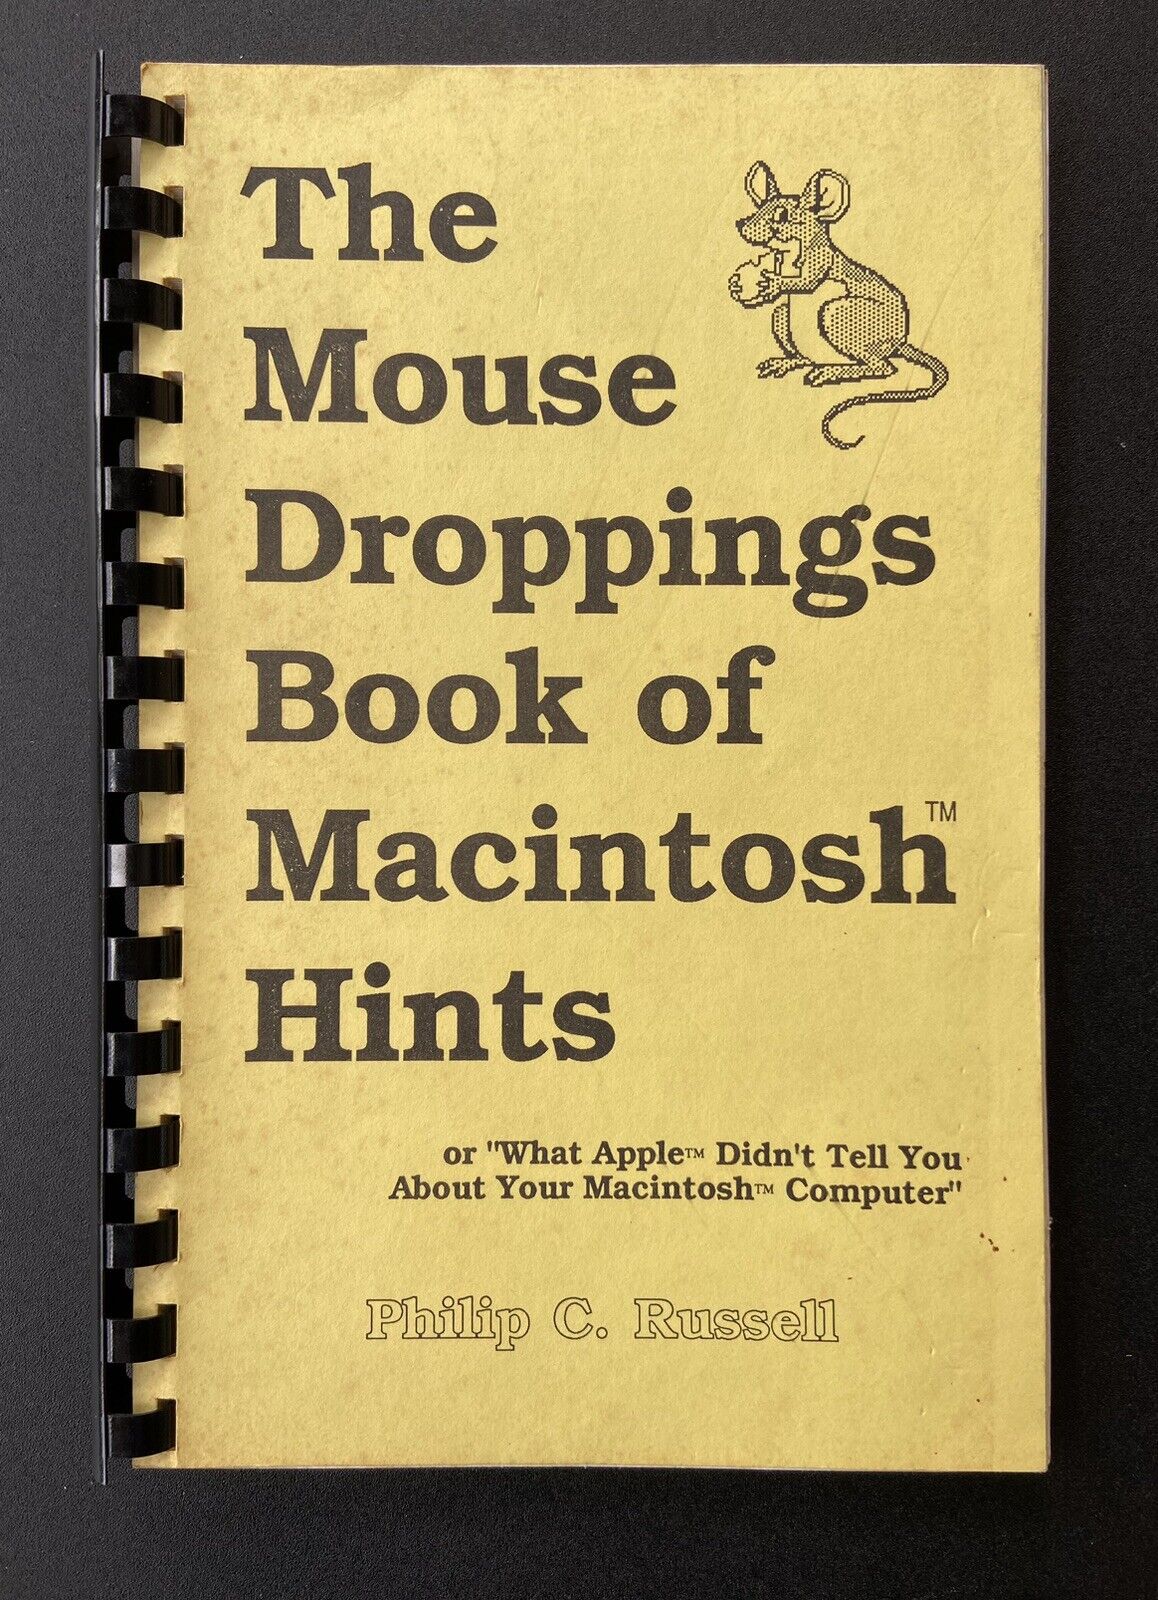 The Mouse Droppings Book of Macintosh Hints / Philip C Russell • 1986